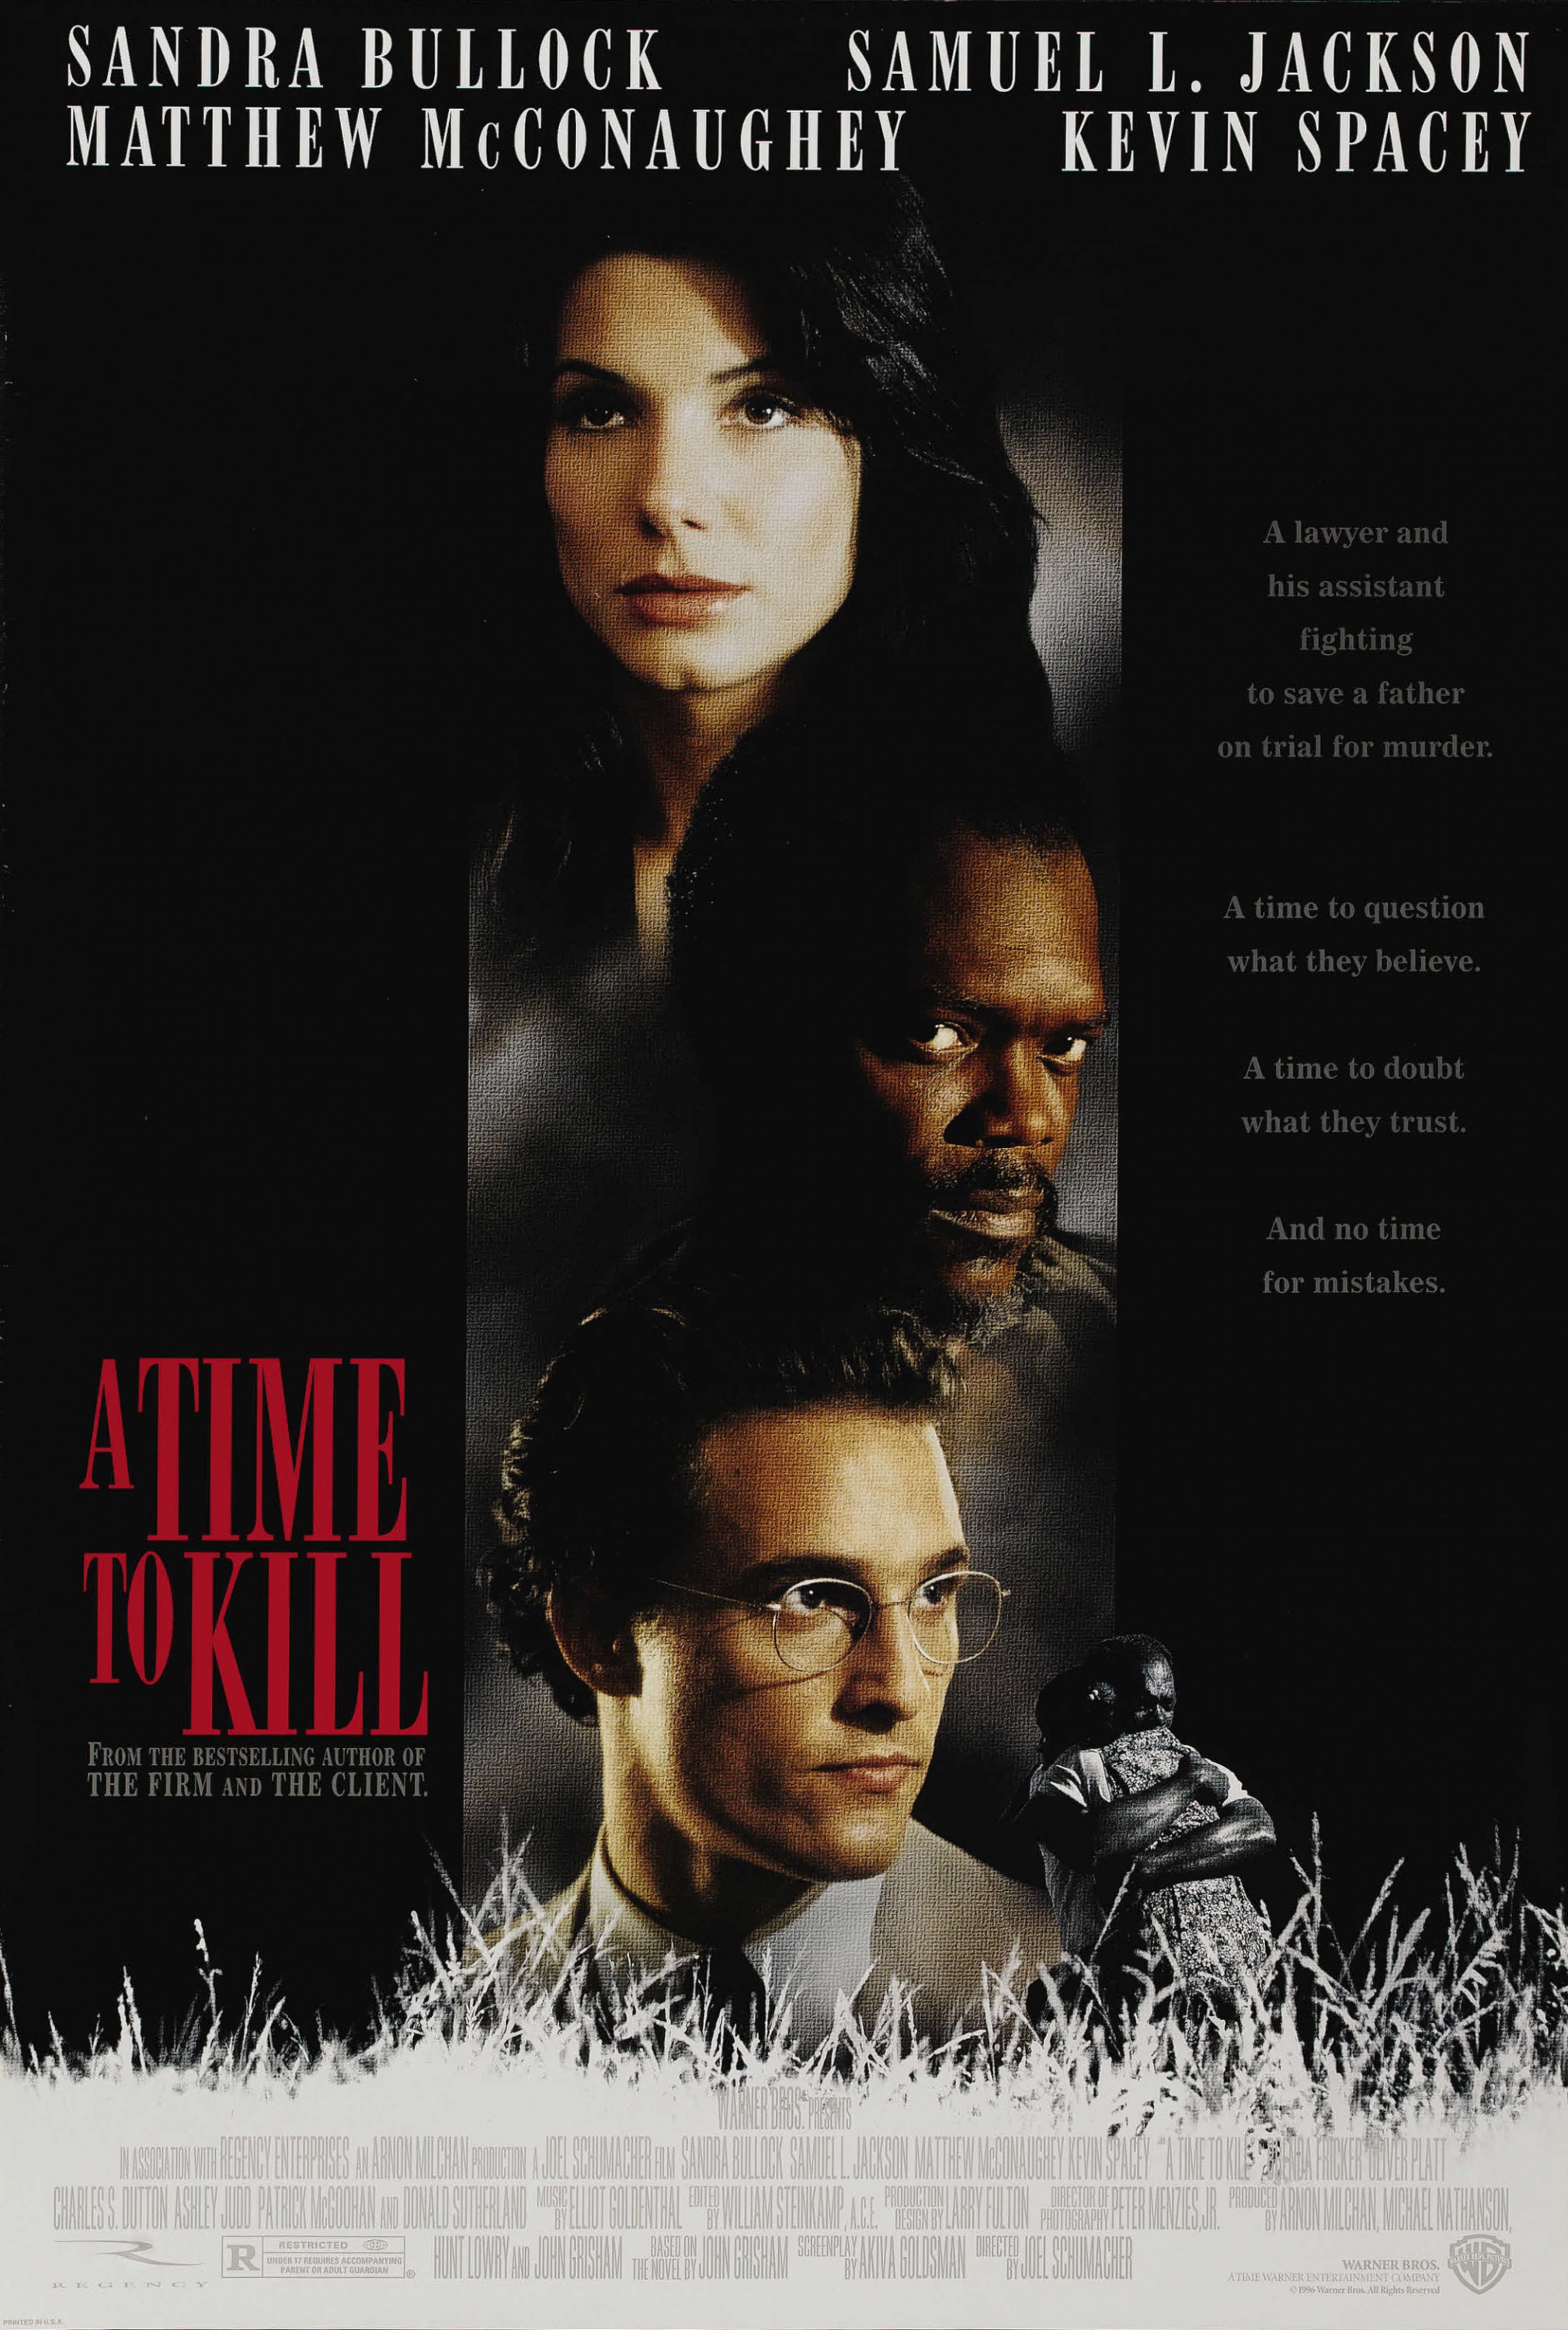 A Time to Kill (film) Warner Bros